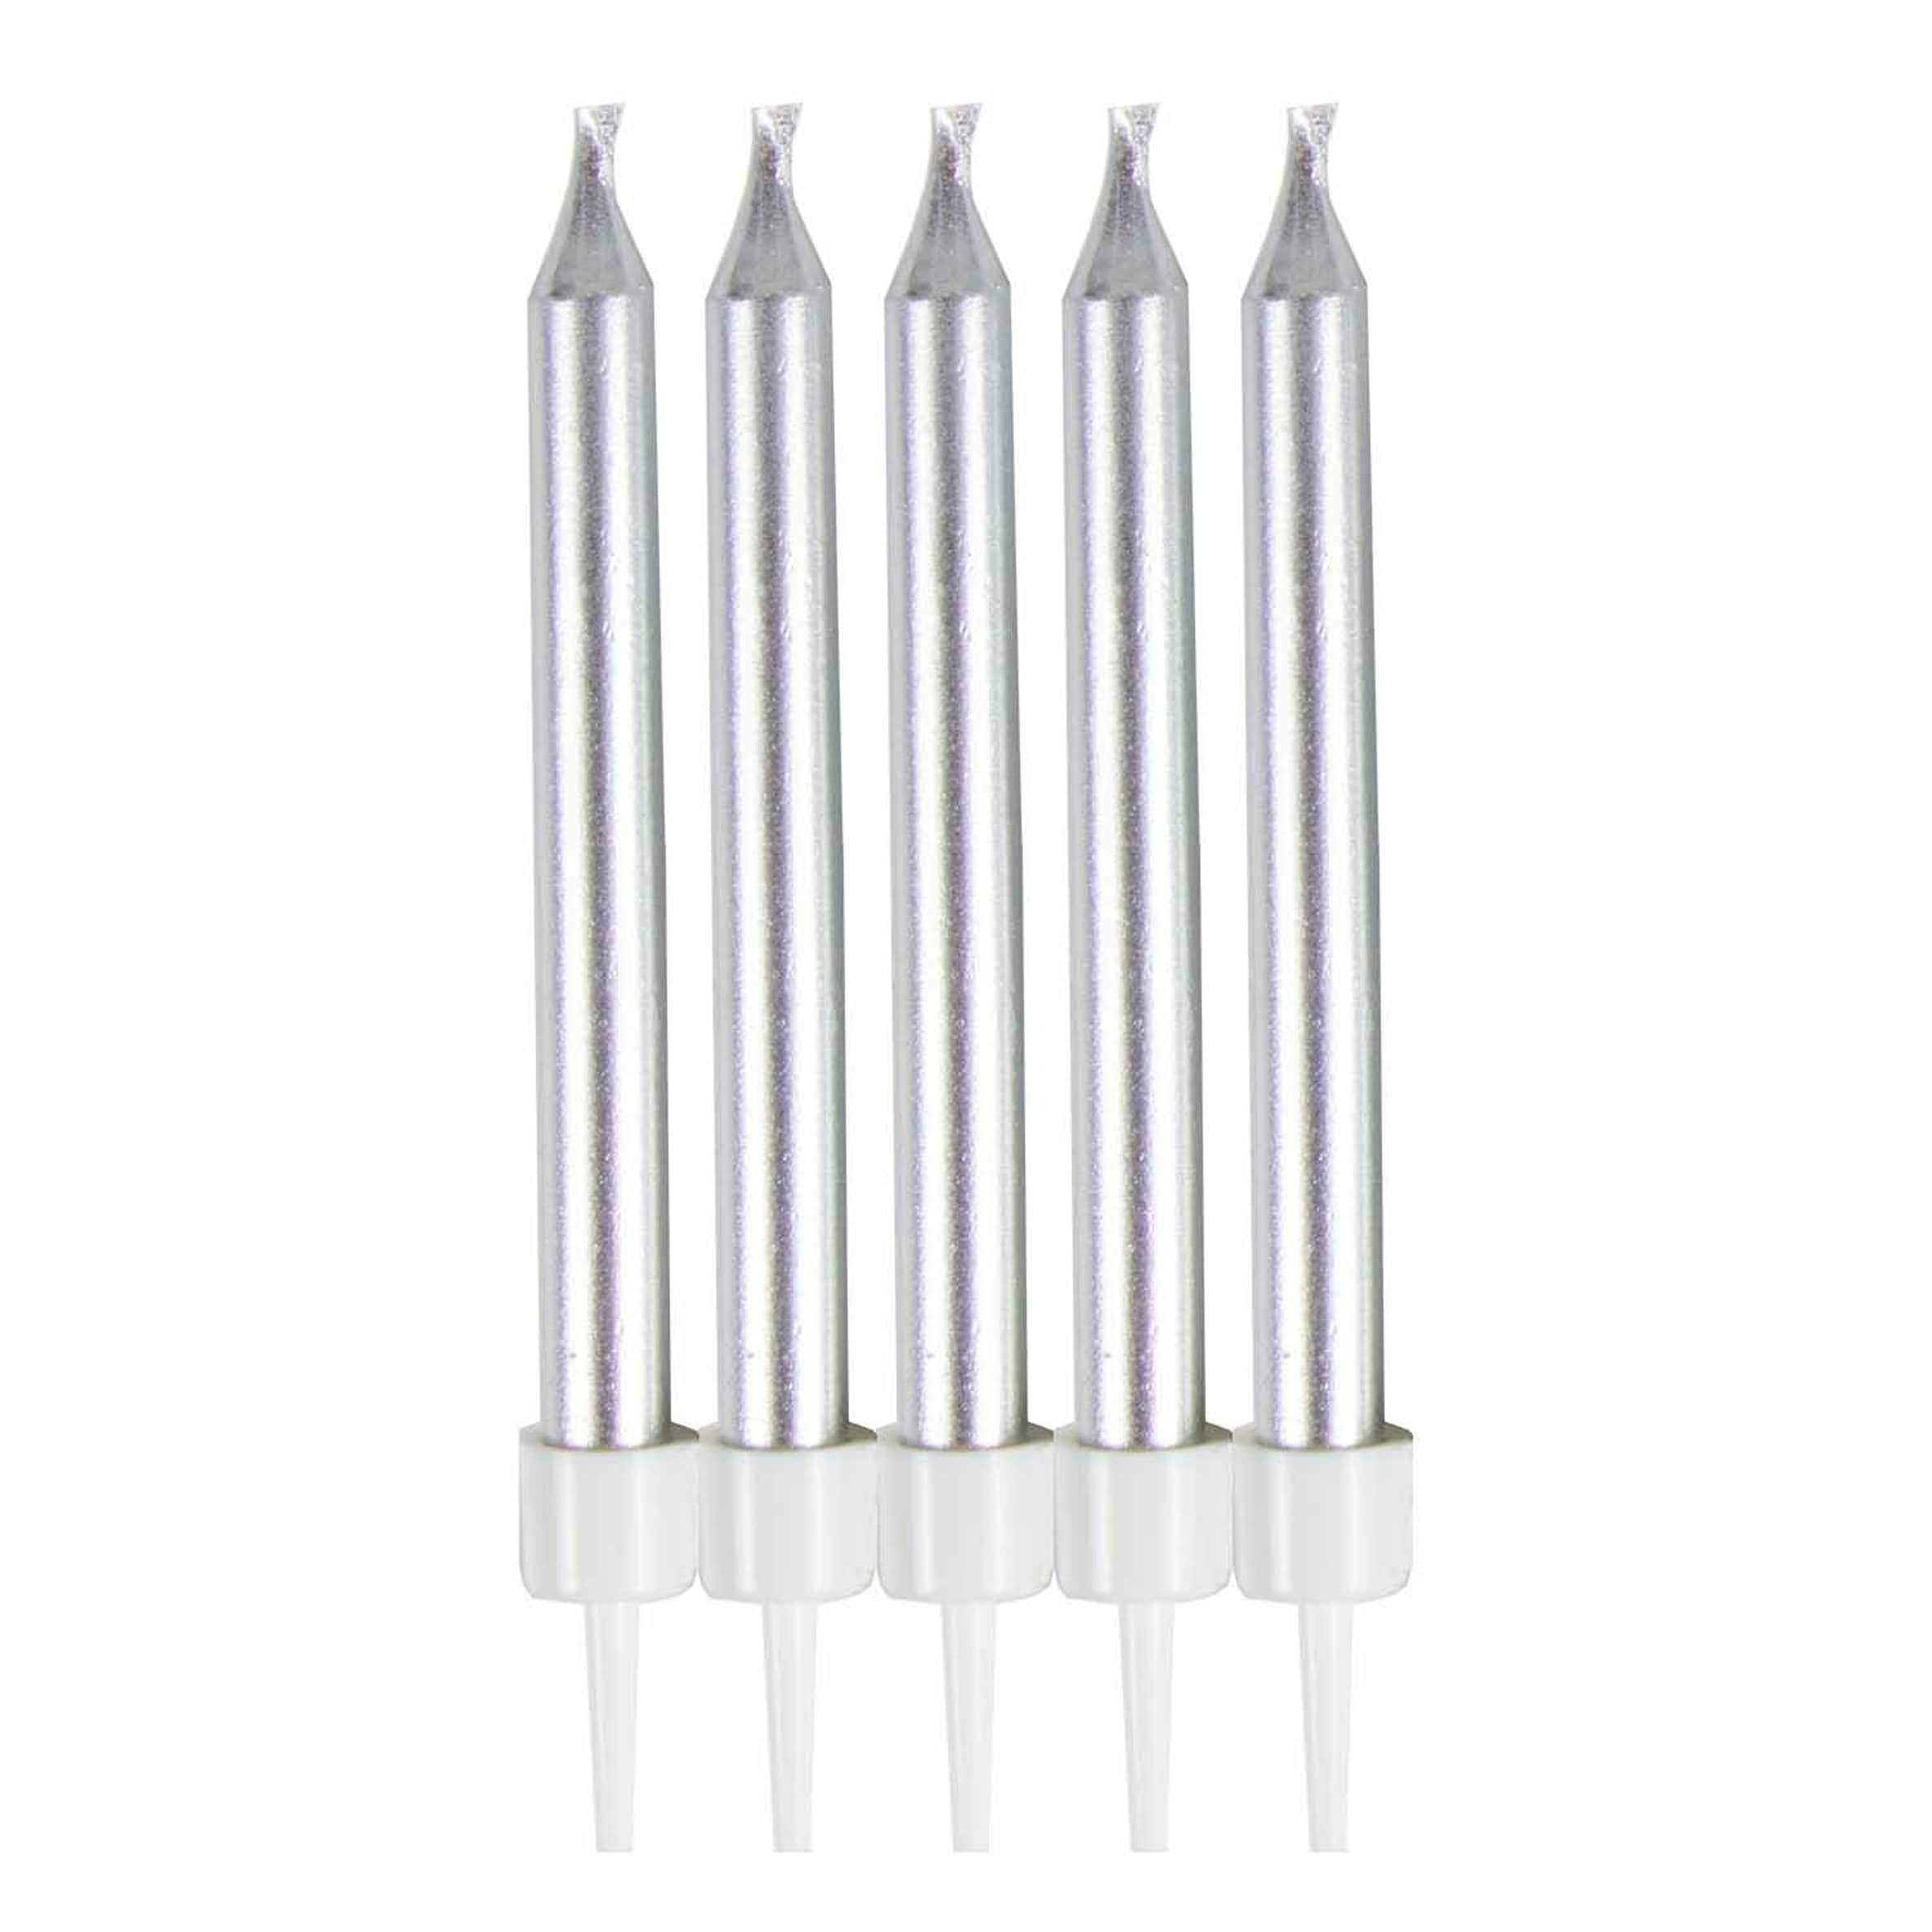 Silver 6cm skinny candles 10pk